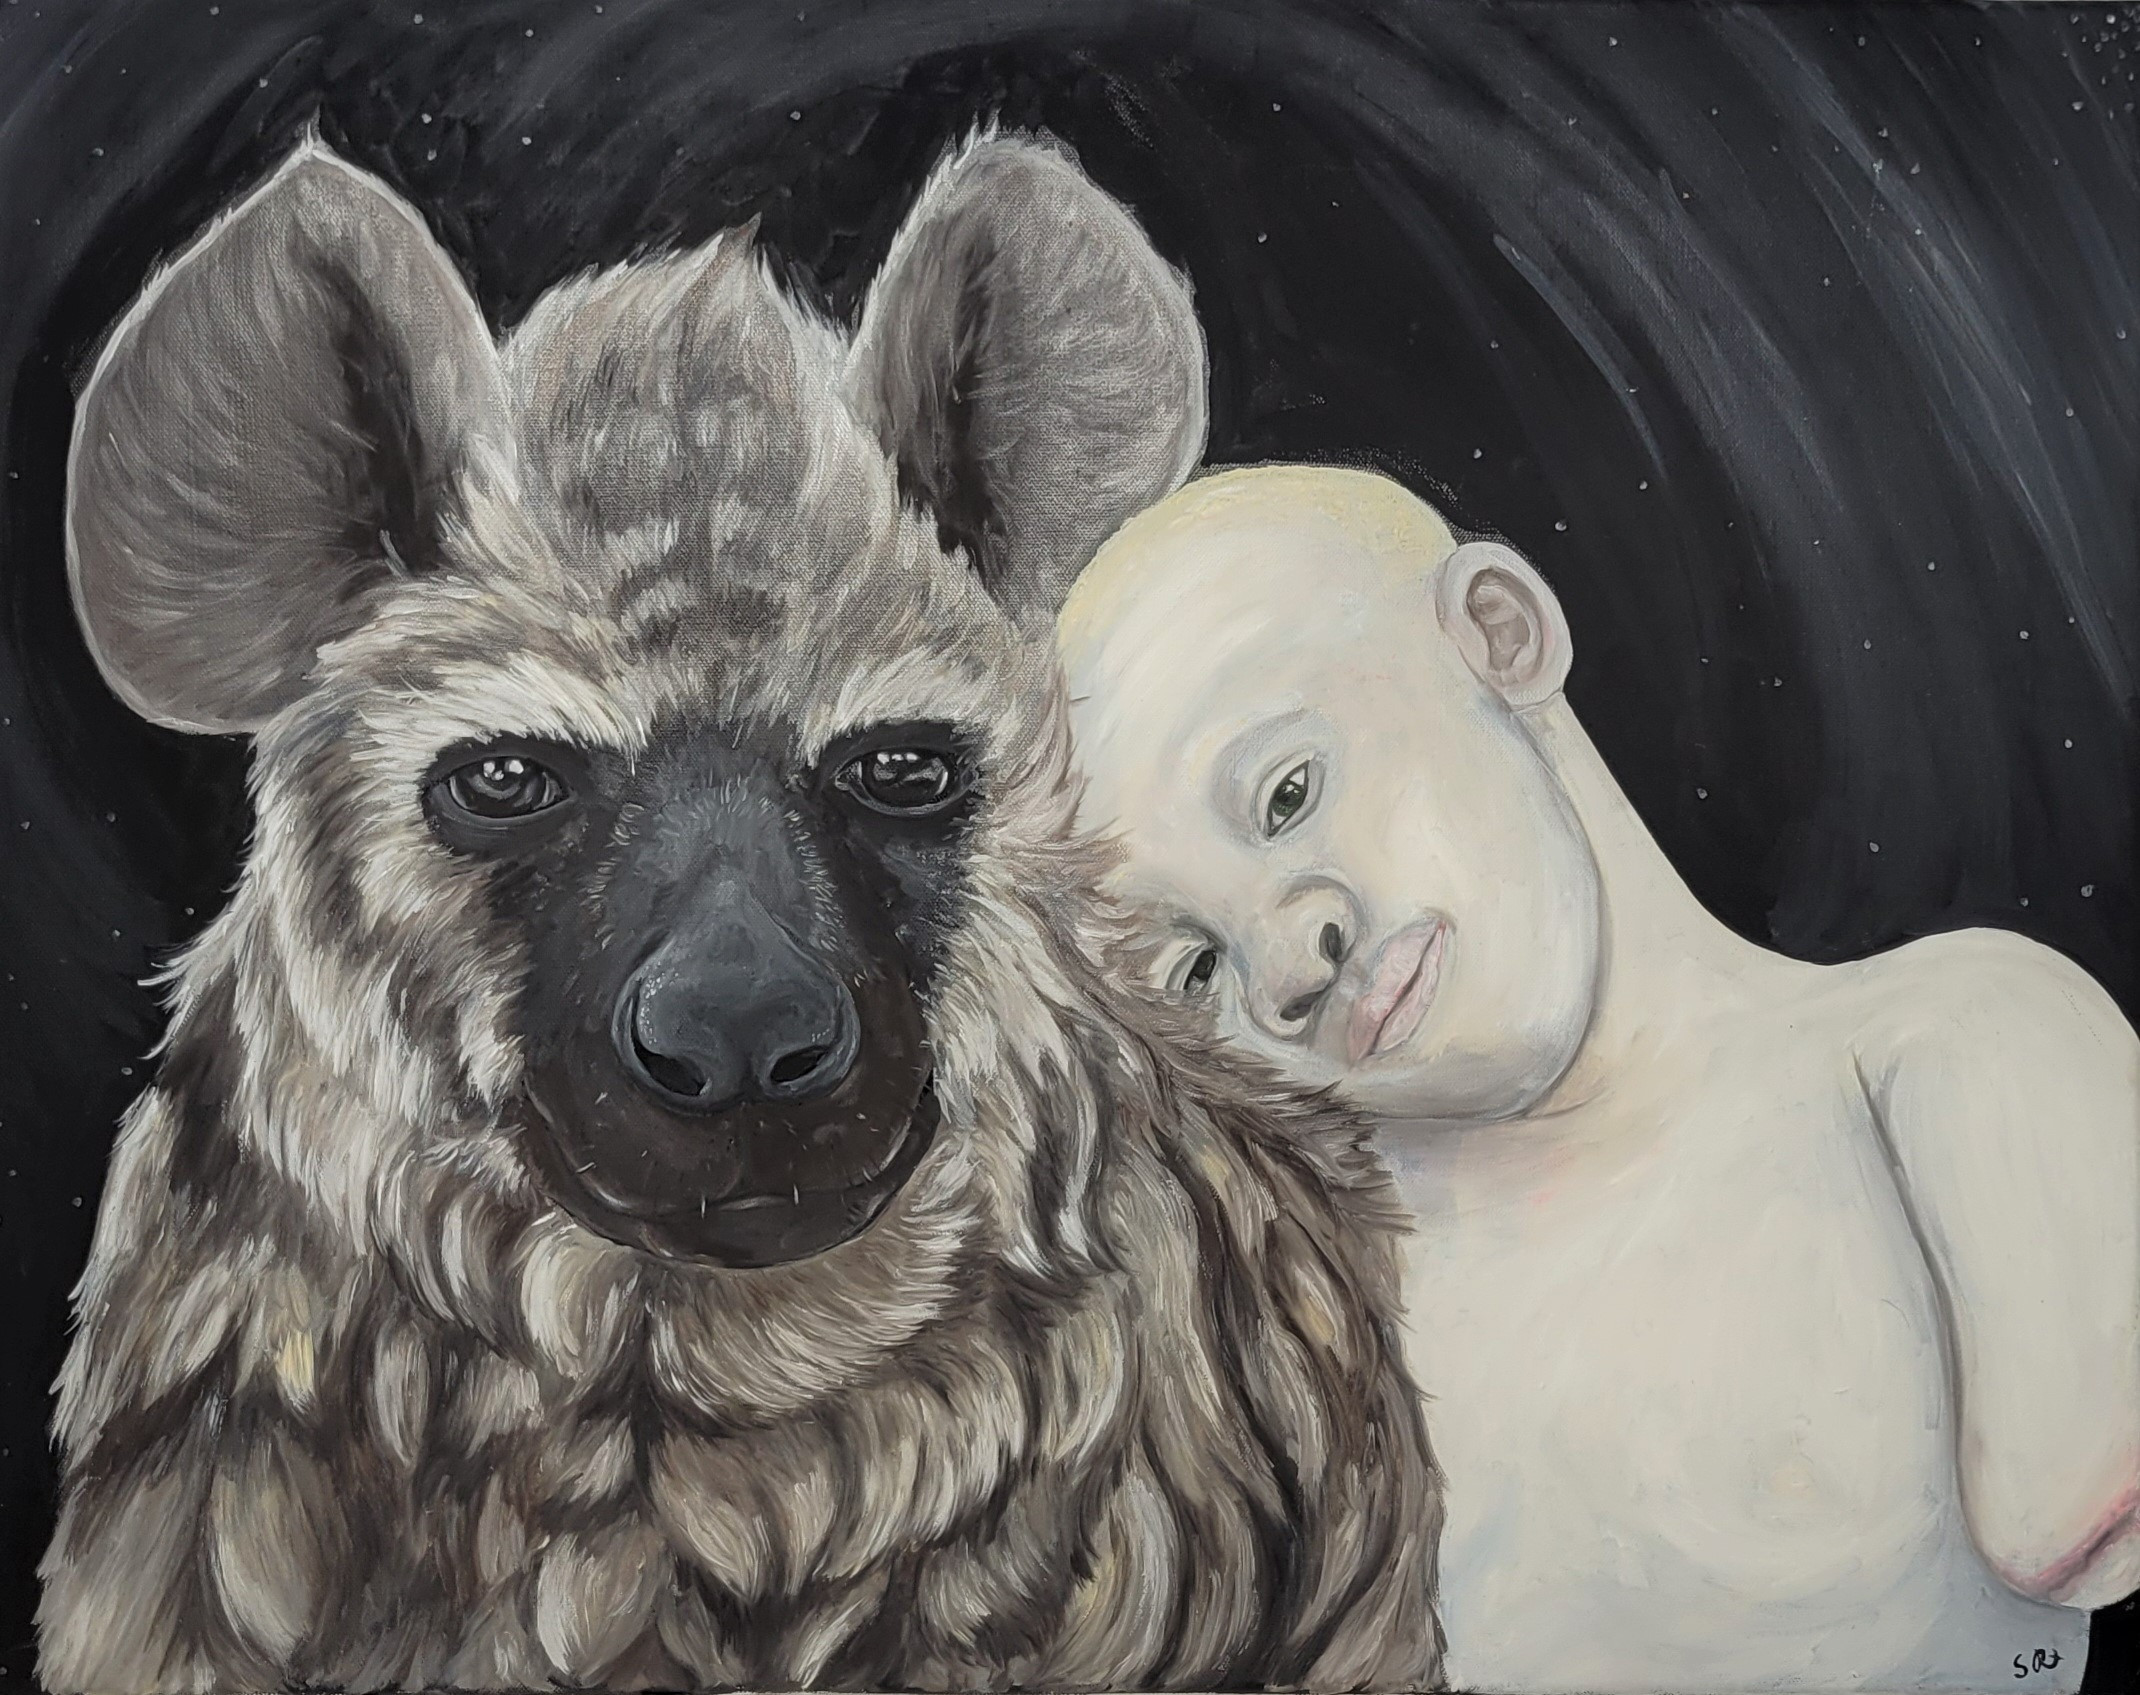 focuses on Albino children in various parts of Africa who are kidnapped for the export of their limbs based on superstitions. Hyenas are also persecuted and killed due to superstitious beliefs.